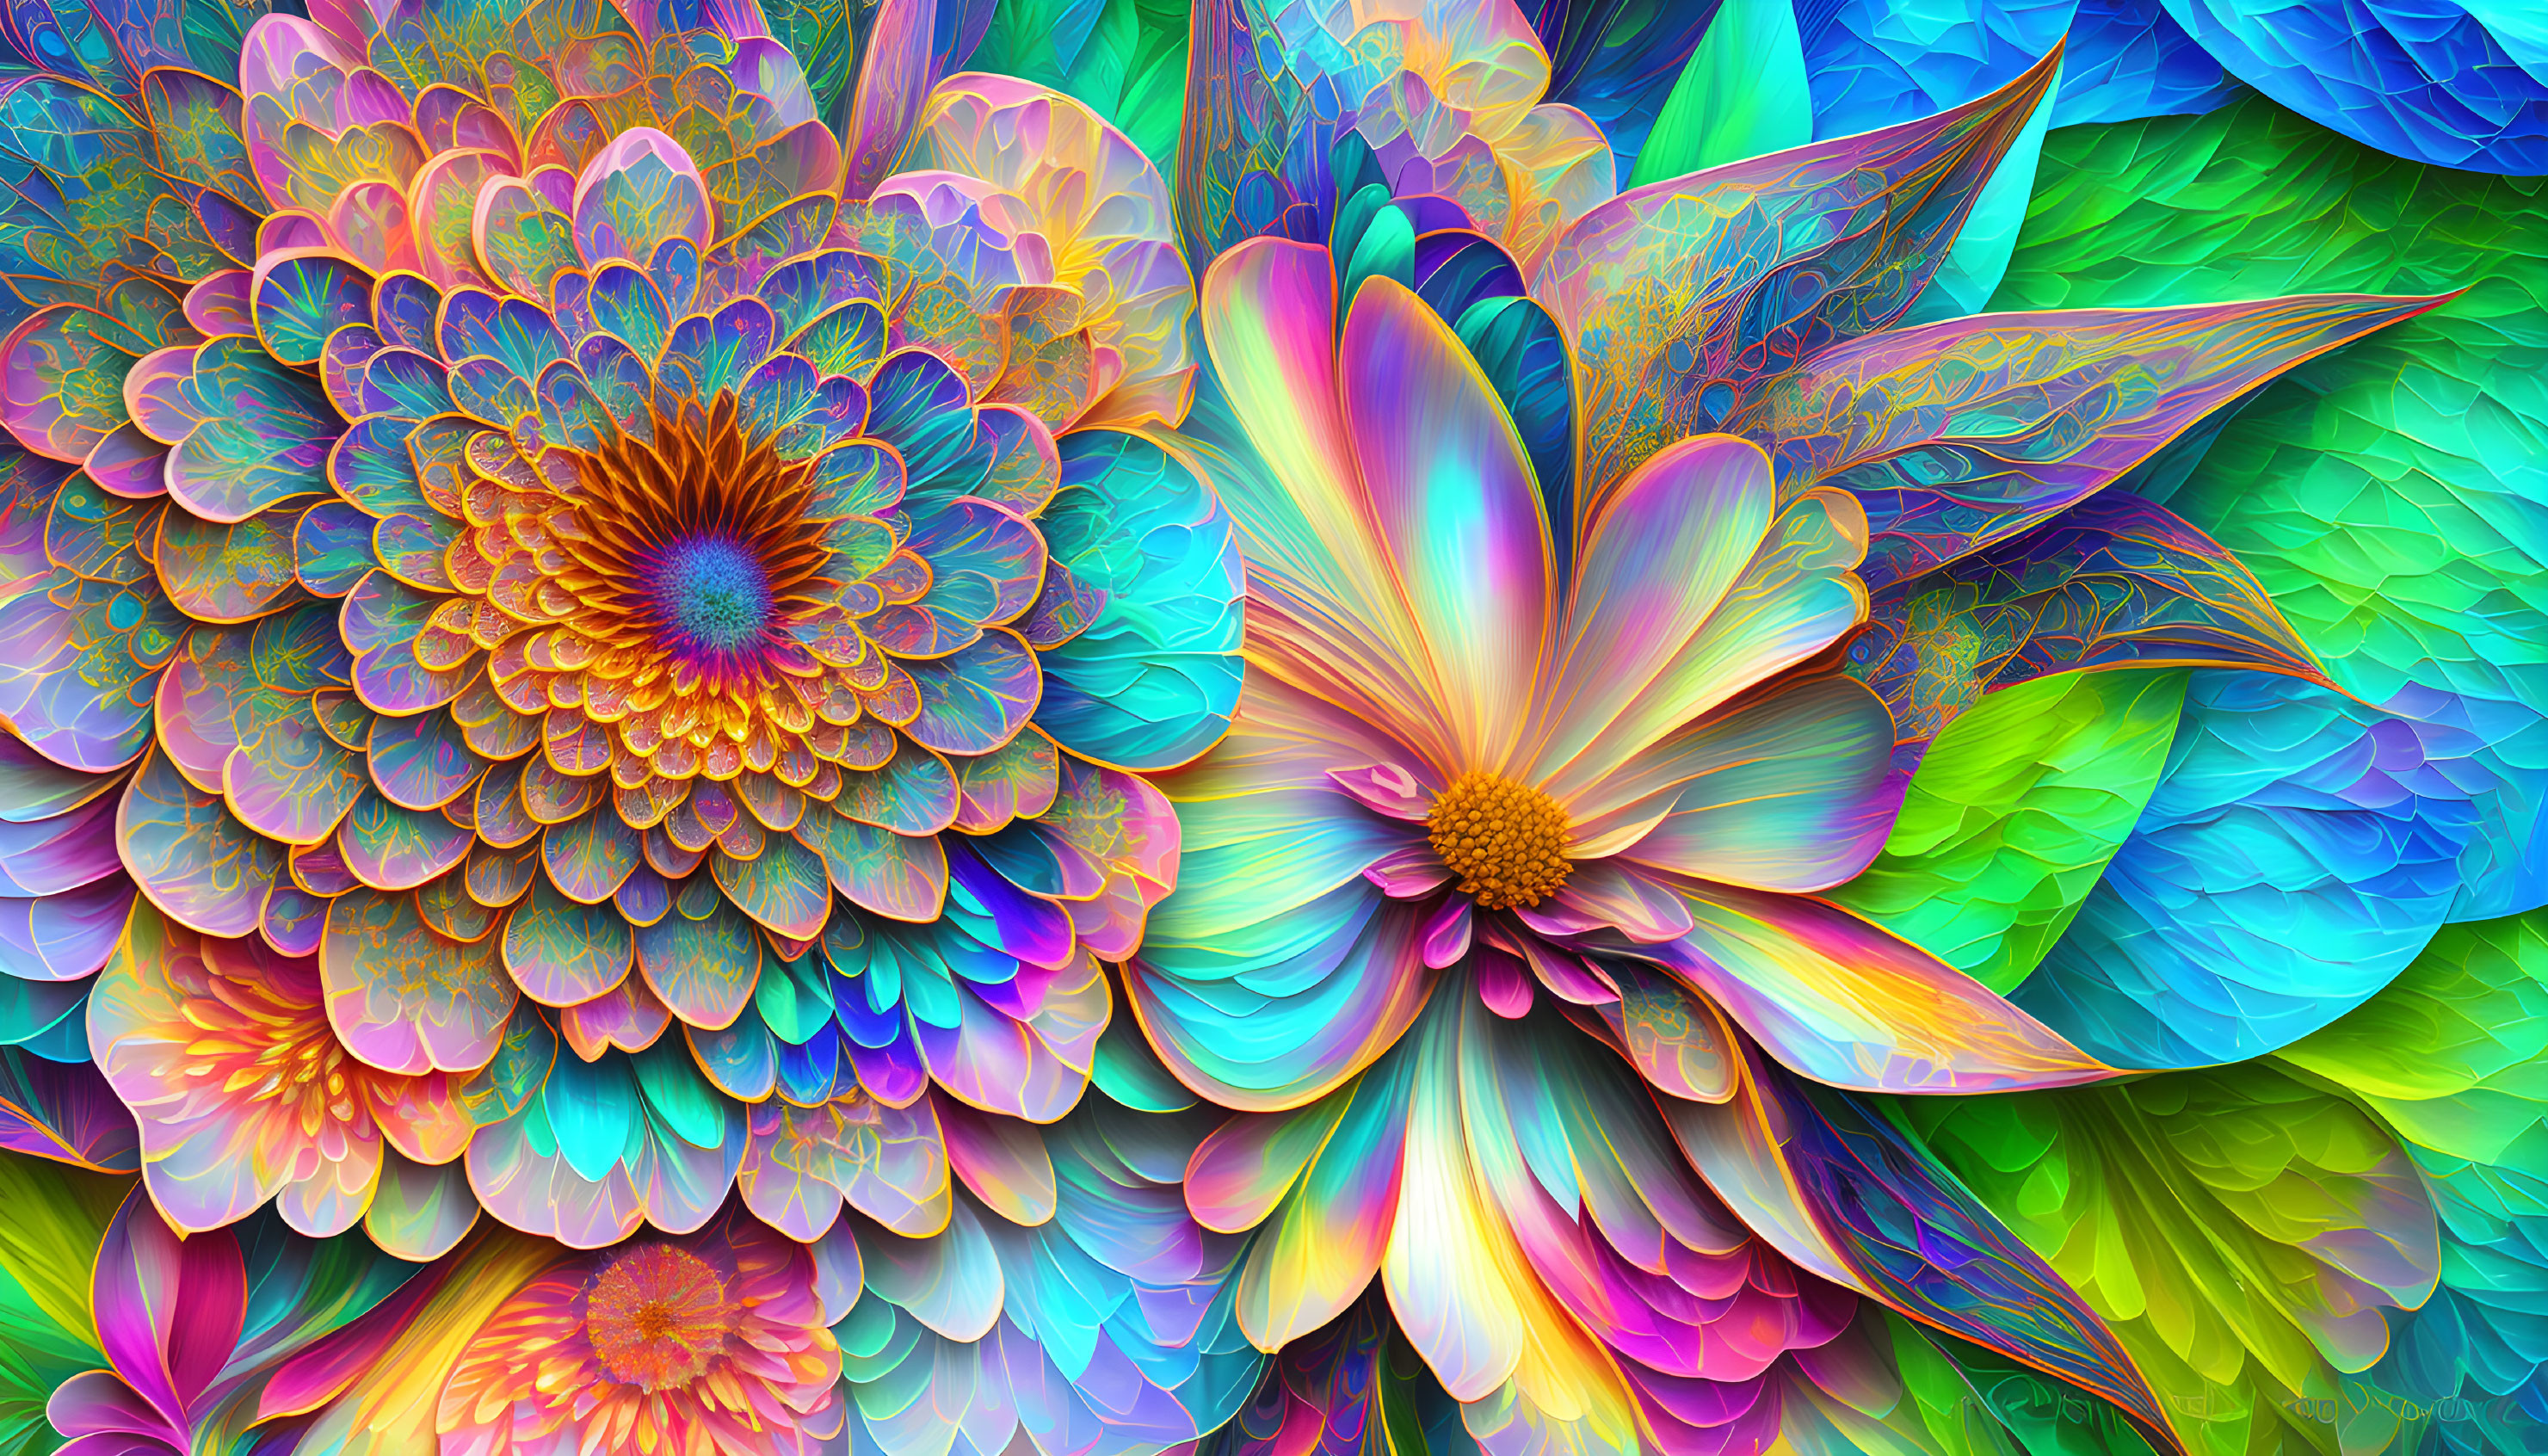 Colorful layered fractal flowers and leaves with kaleidoscopic patterns